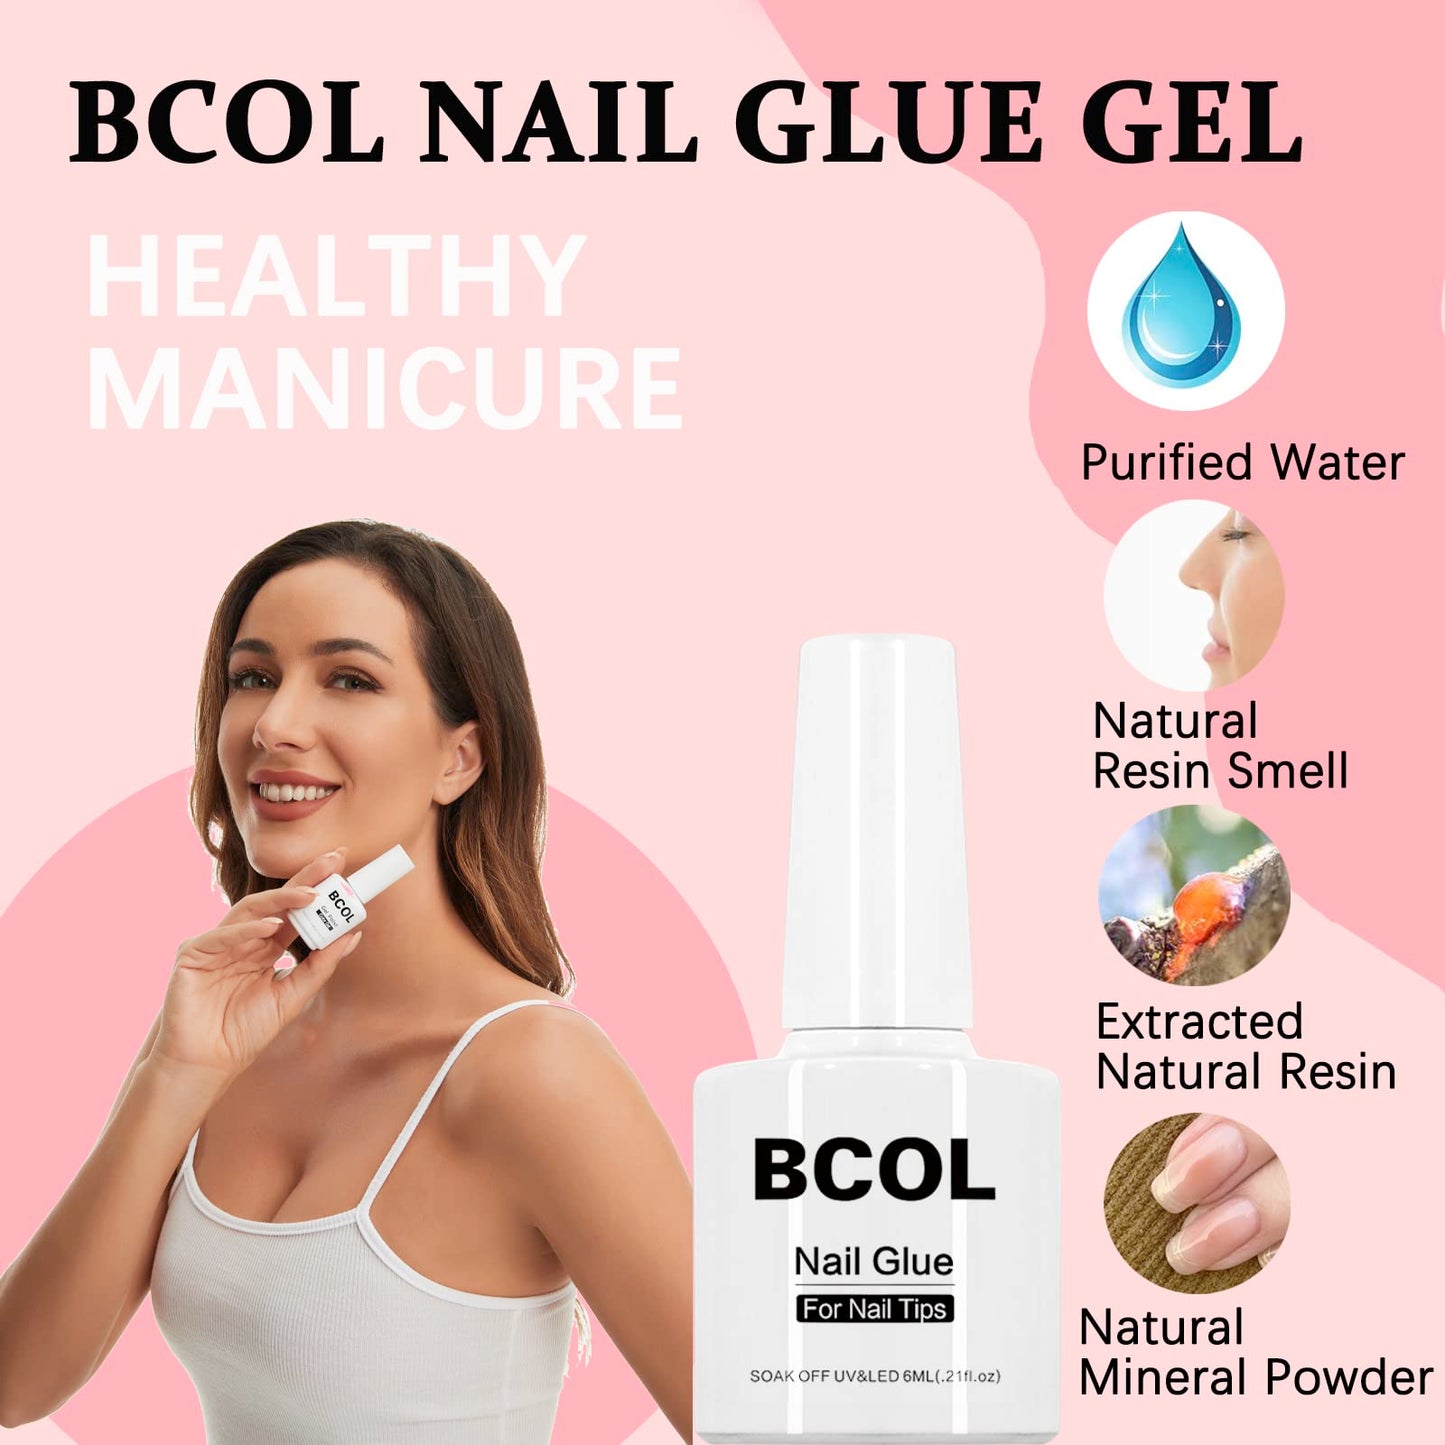 BCOL Nail Tips and Glue Gel Nail Kit, 2 In 1 Nail Gel and Base Gel with 500Pcs Coffin Nails and Innovative UV LED Nail Lamp for Gel Art Liner Polish Extension Different Nail Art Nails DIY Home Gifts